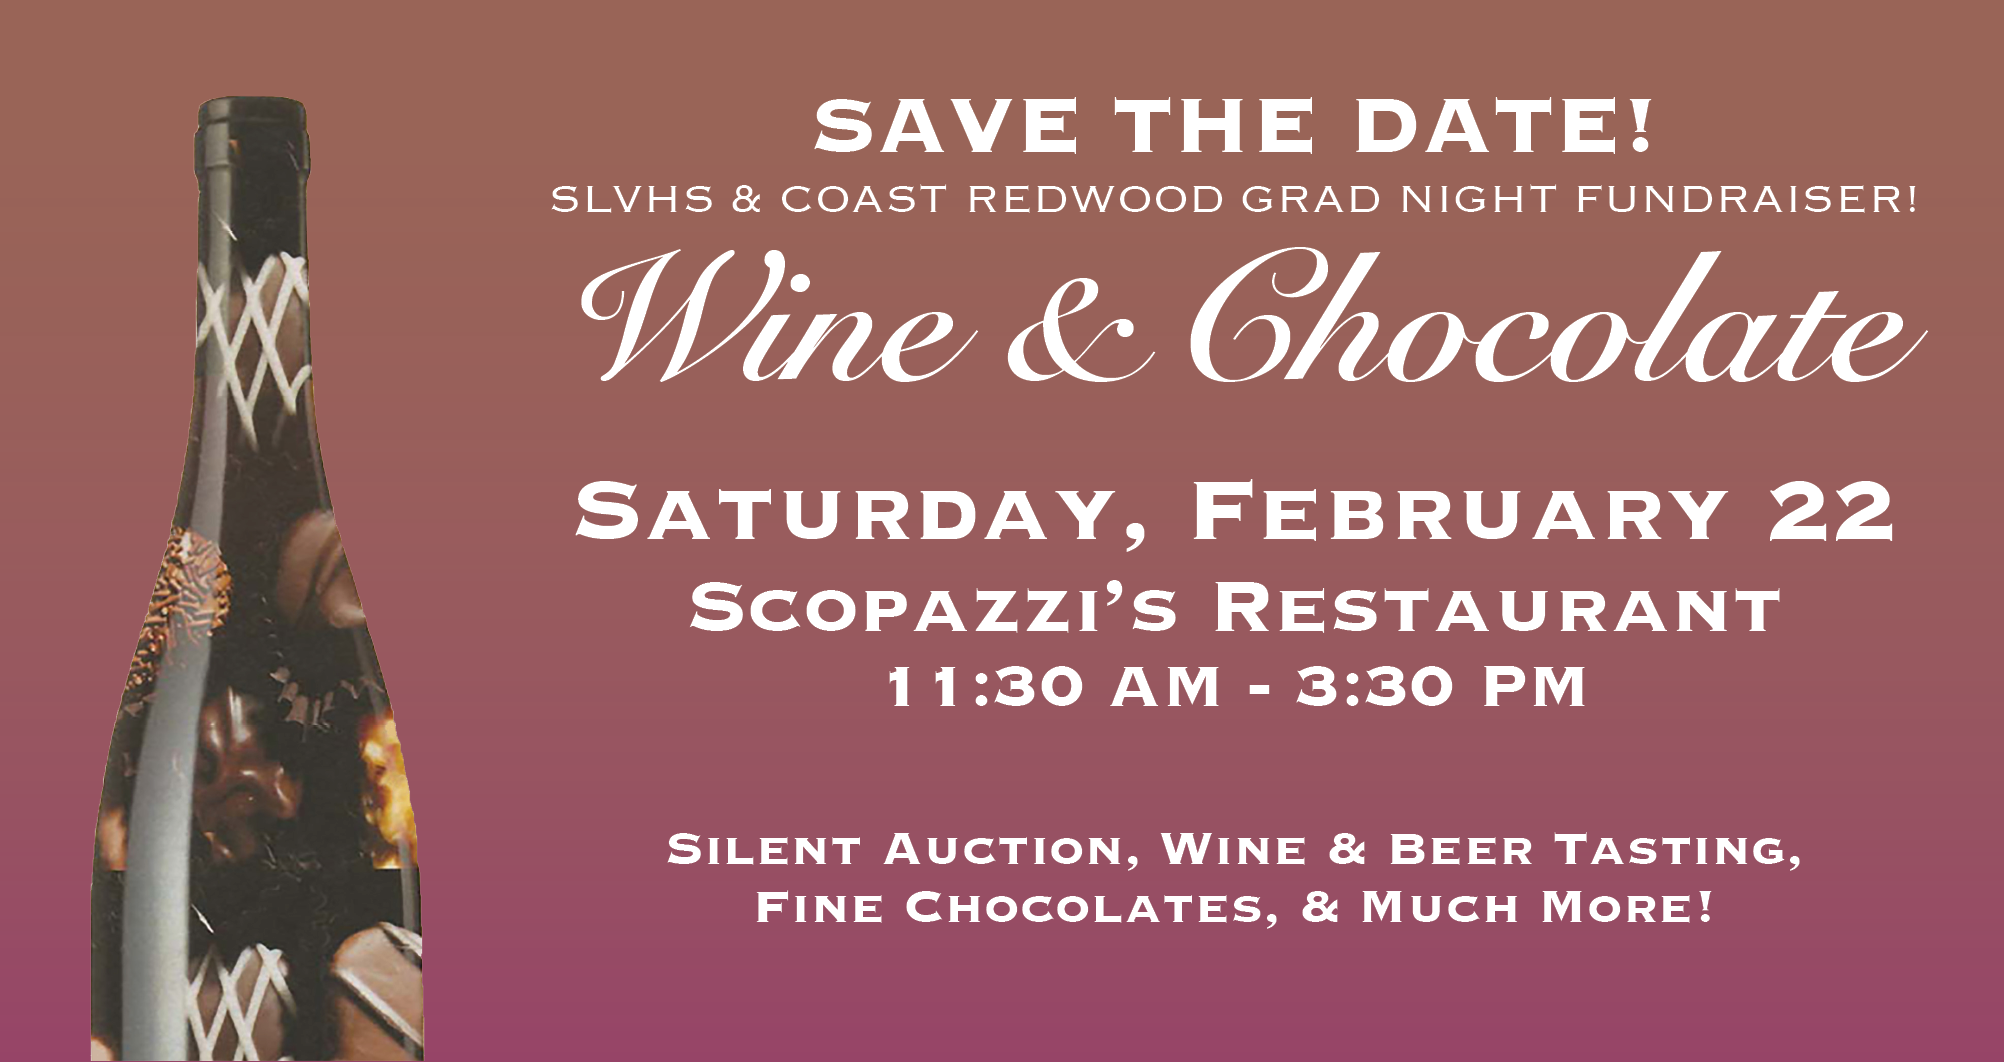 save the date wine & chocolate fundraiser February 22